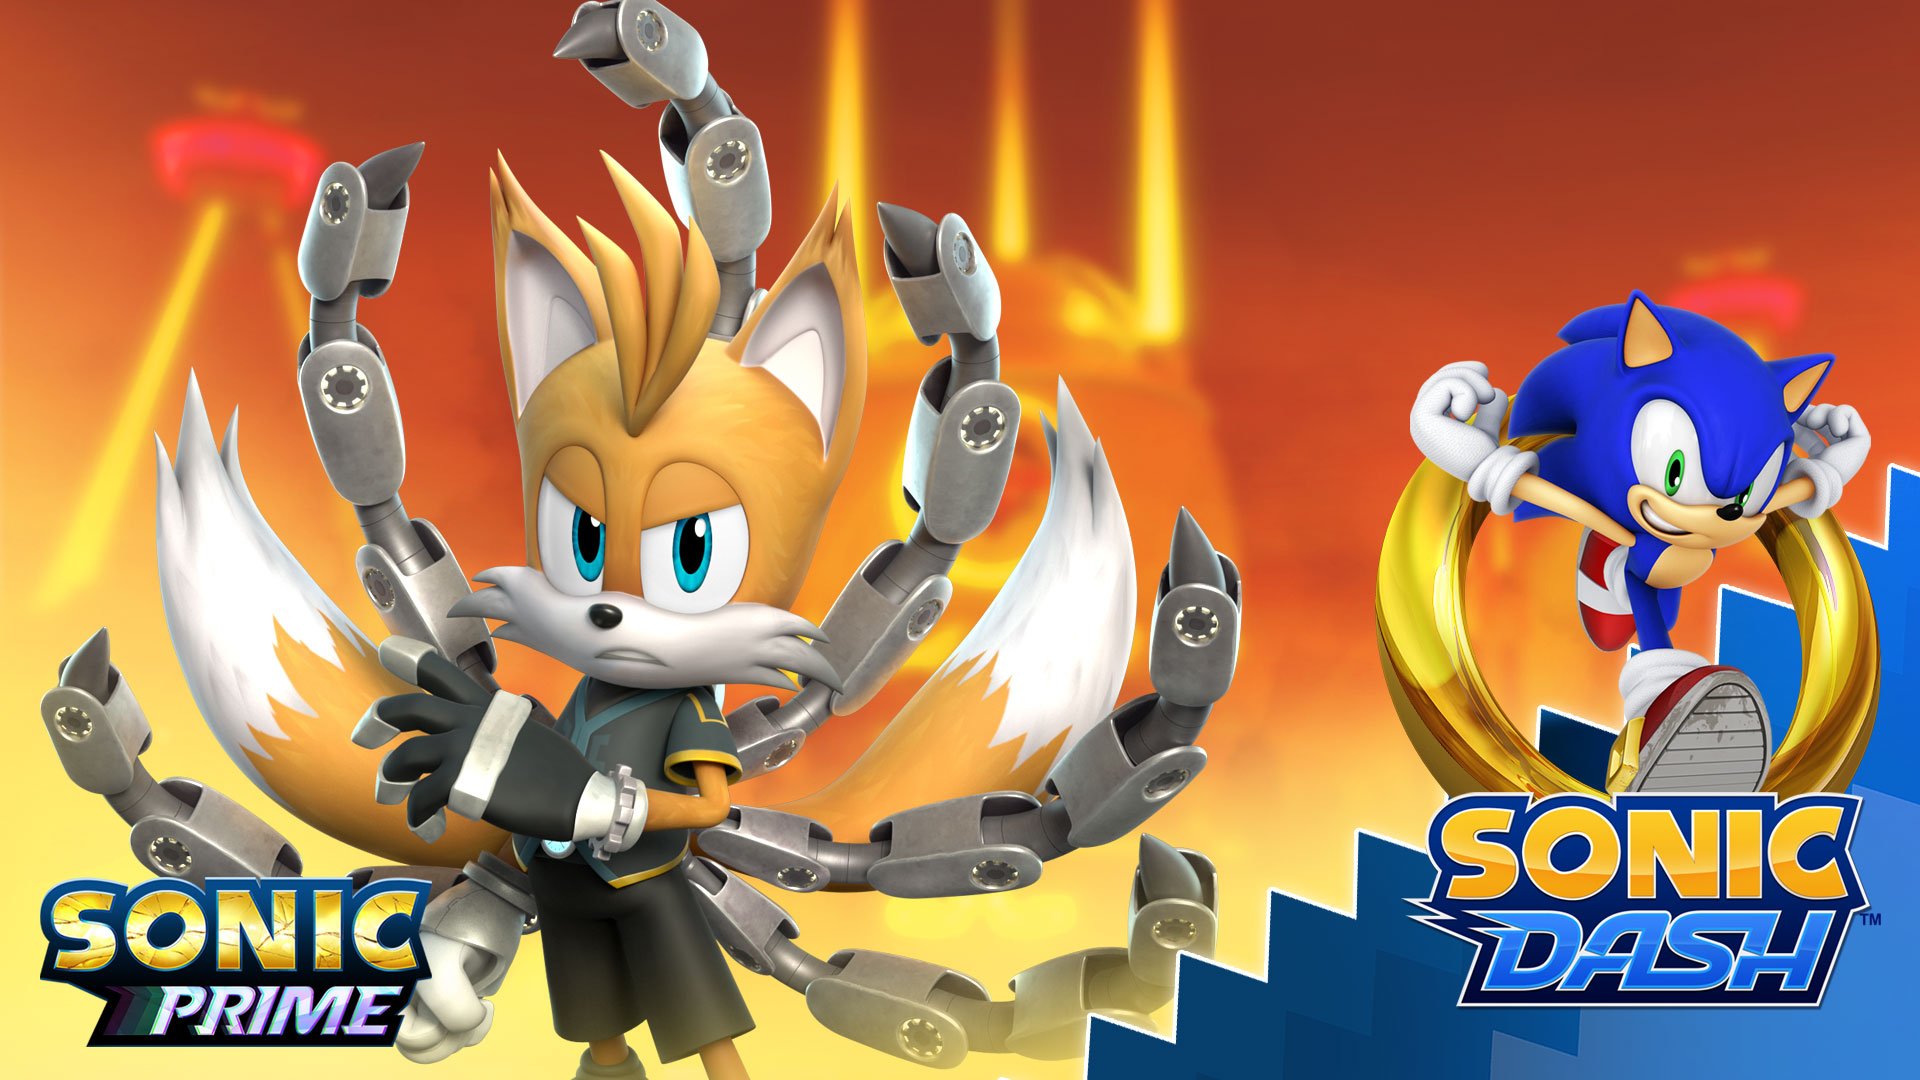 SEGA HARDlight an alternate reality! Win Tails Nine and collect Sonic Prime shards for awesome rewards in #SonicDash!